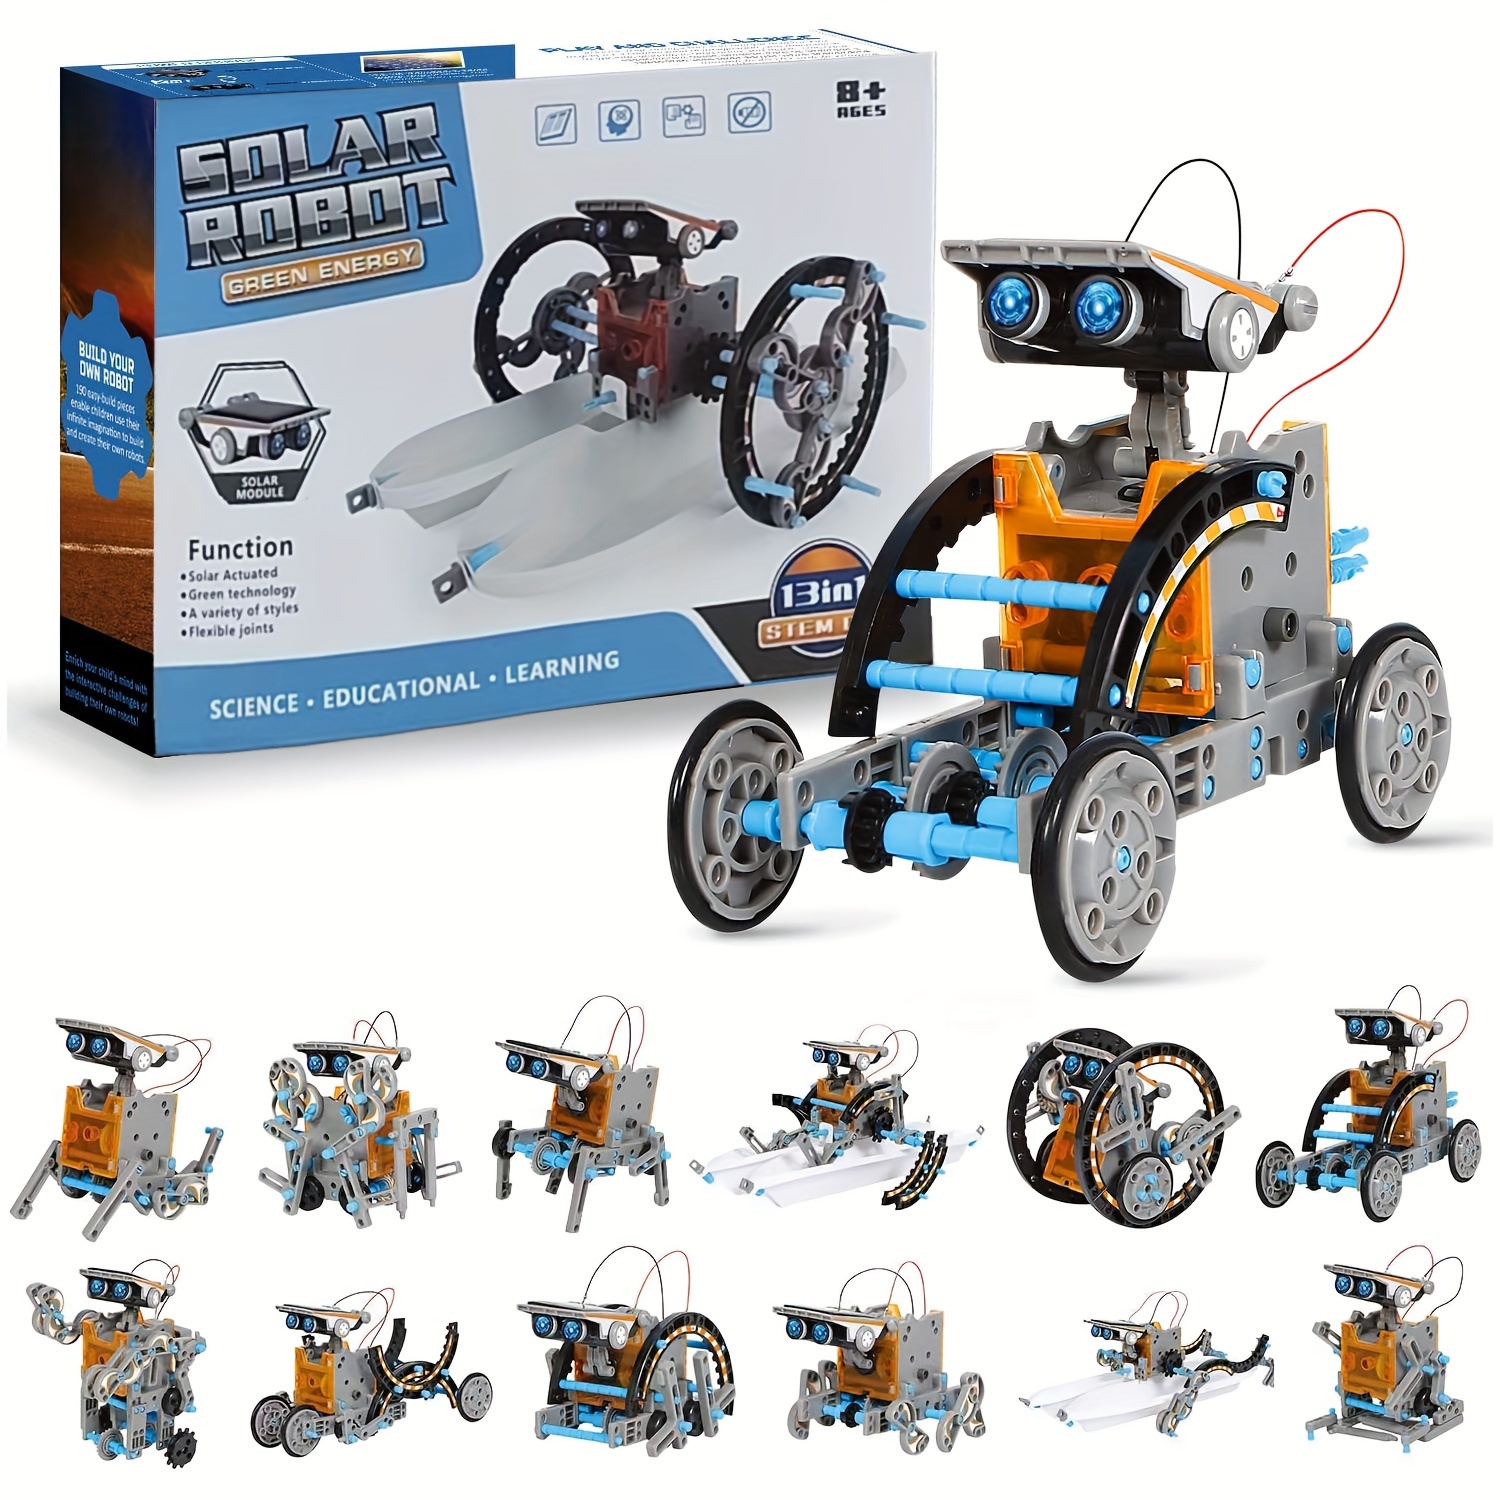  Japace Electric Robotics Science Kits, Stem Projects for Kids  Ages 8-12, DIY Building STEM Toys for Boys & Girls